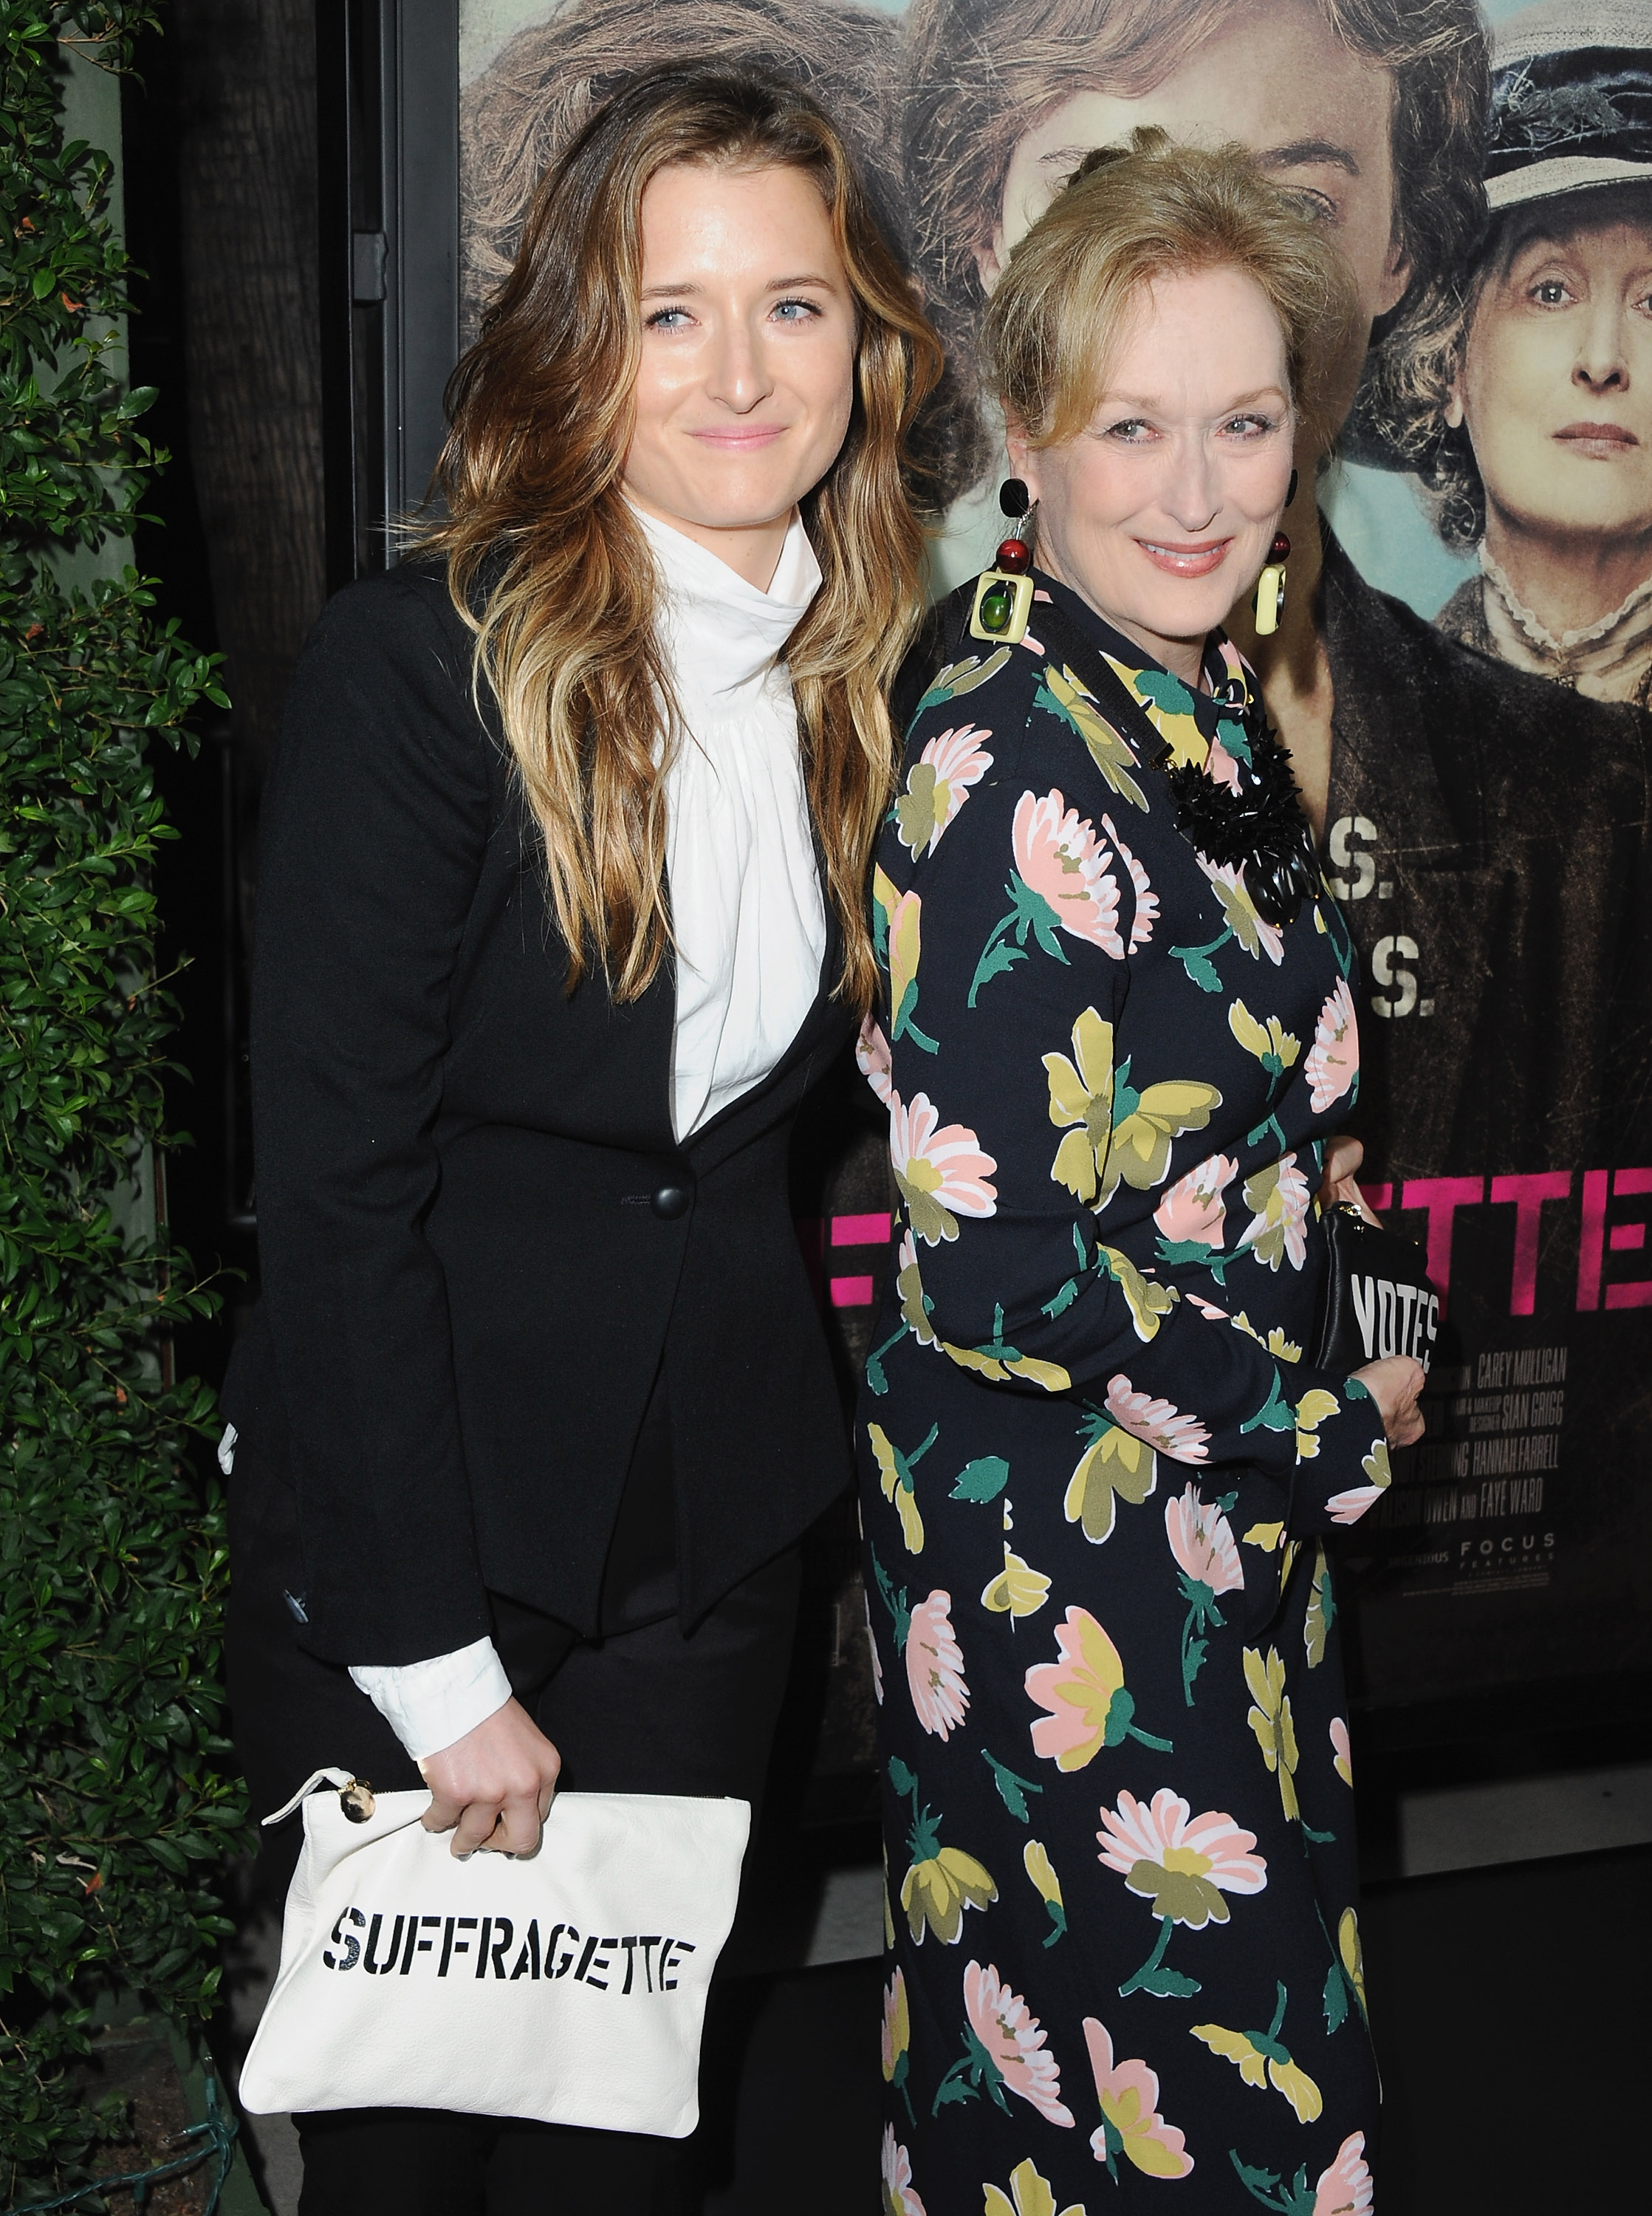 Grace Gummer (L) and Meryl Streep in Beverly Hills, California on October 20, 2015 | Source: Getty Images